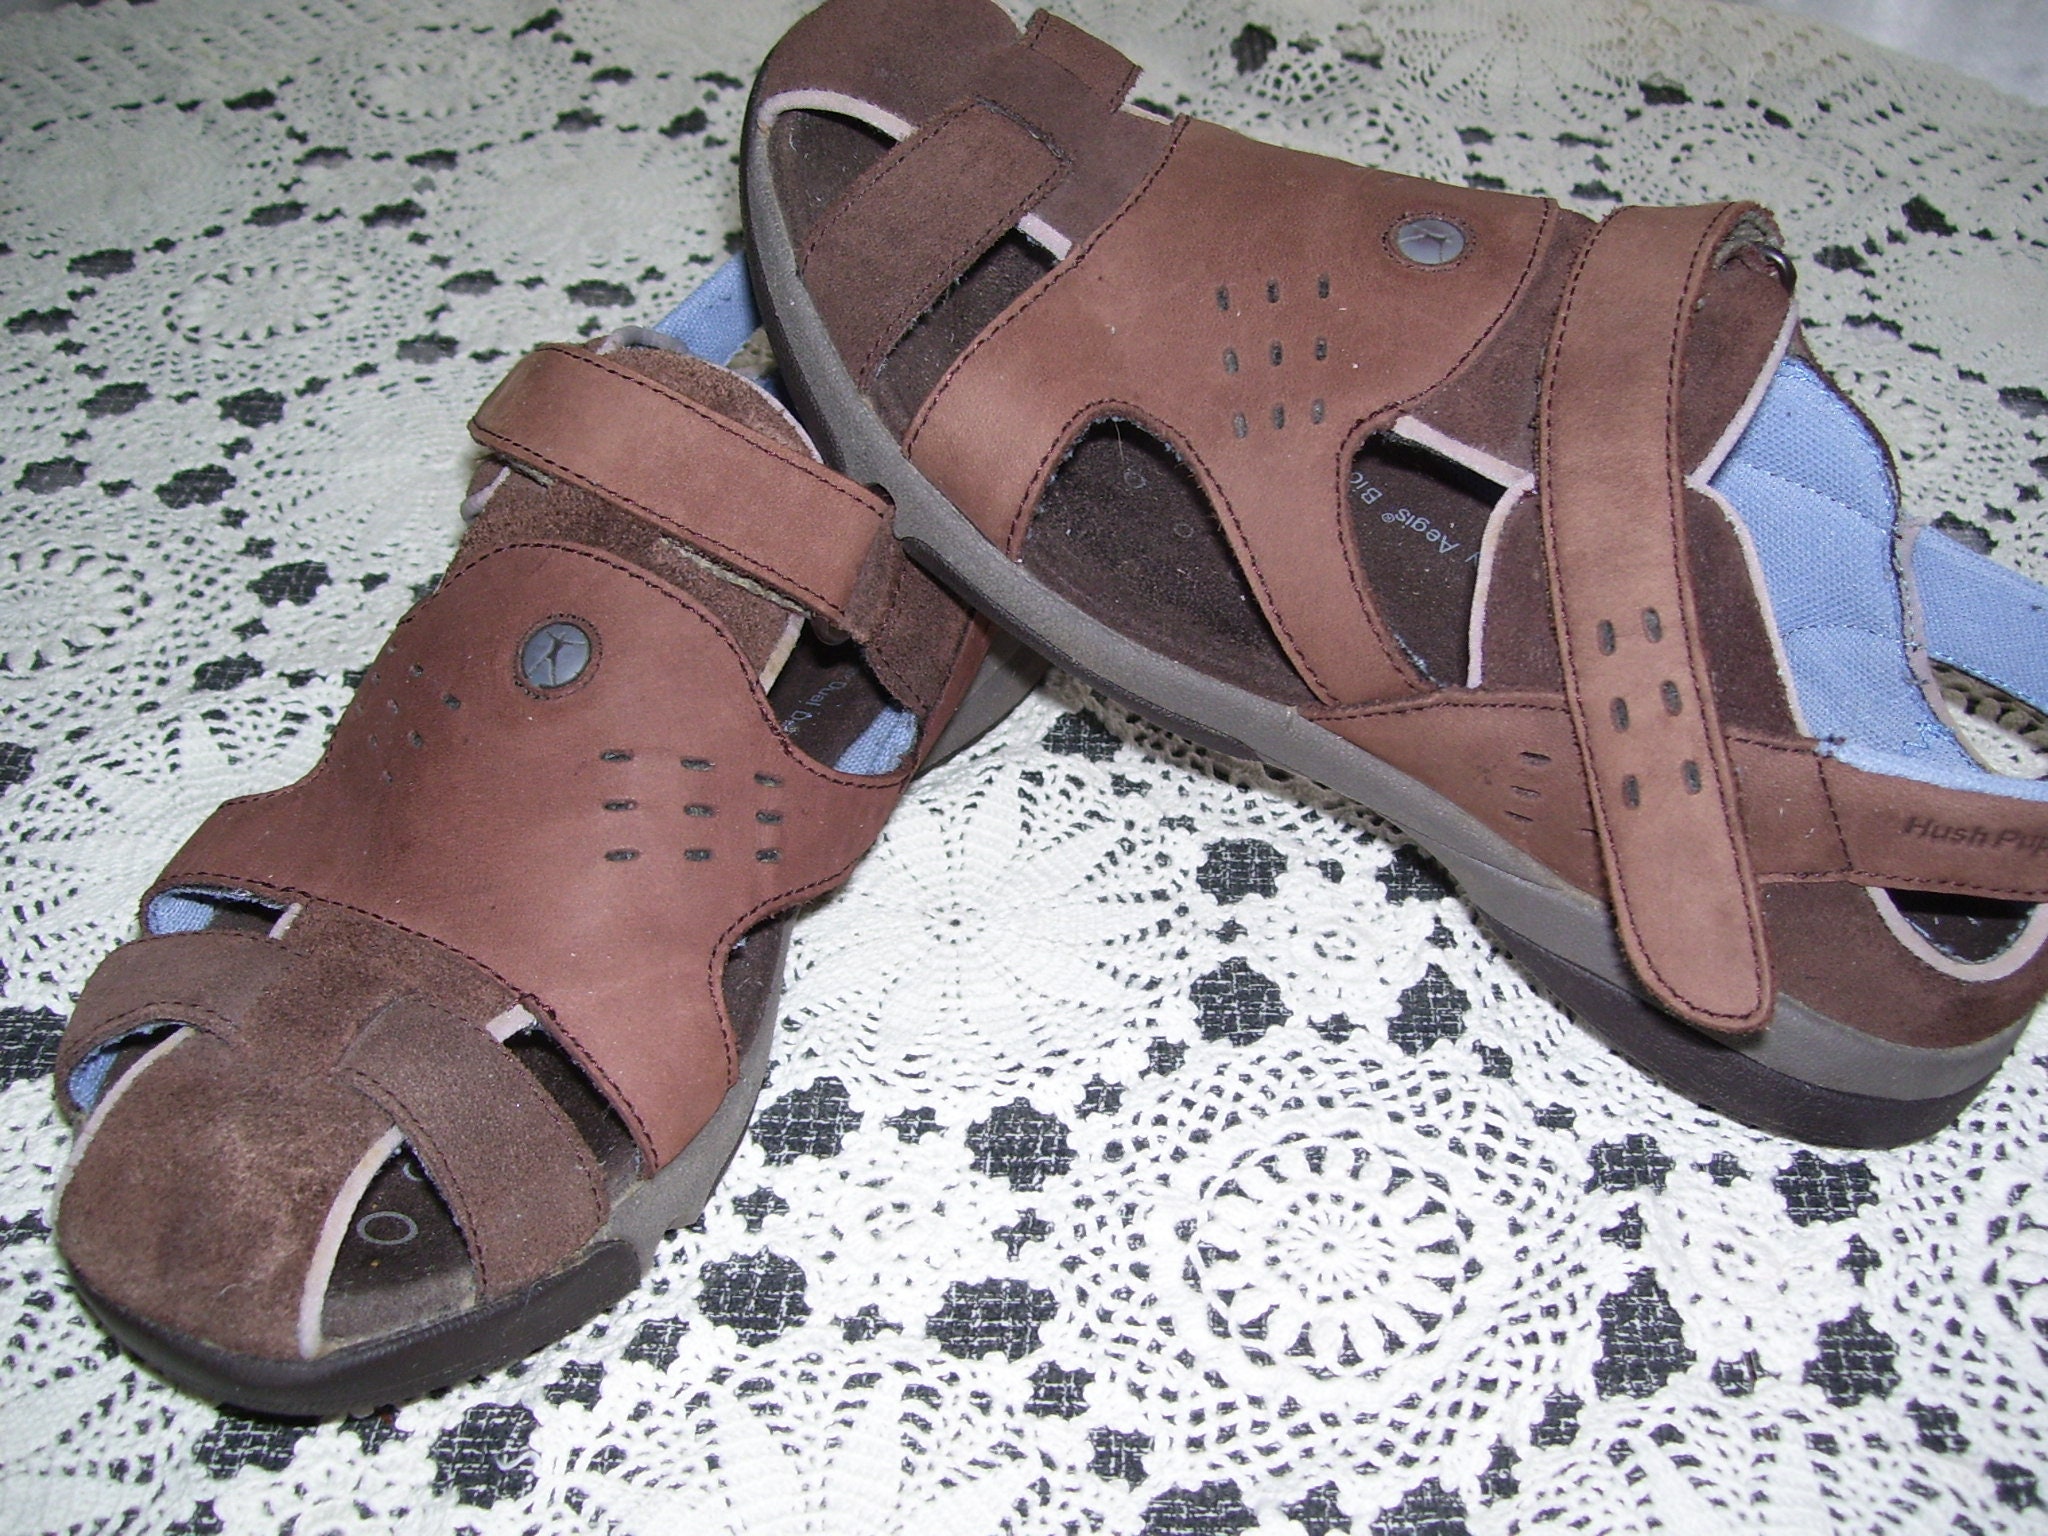 HUSH PUPPIES MENS LEATHER SANDALS SLIPPERS BROWN SHOES SIZE 6 CASUAL BOMBER  | eBay